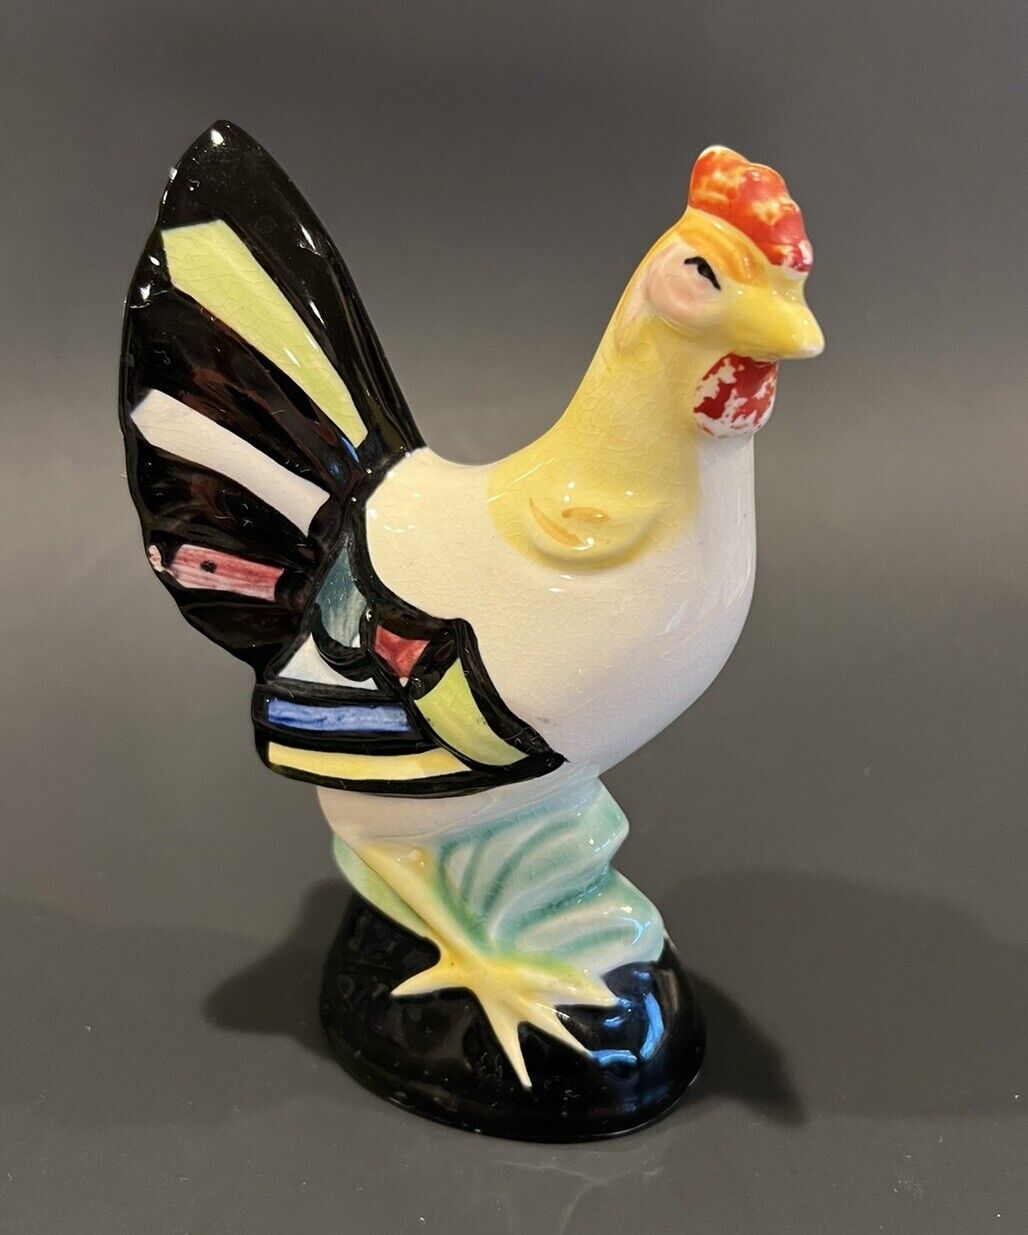 Vintage Mid Century Ceramic Rooster Figurine Made In Japan Hand Painted Decor